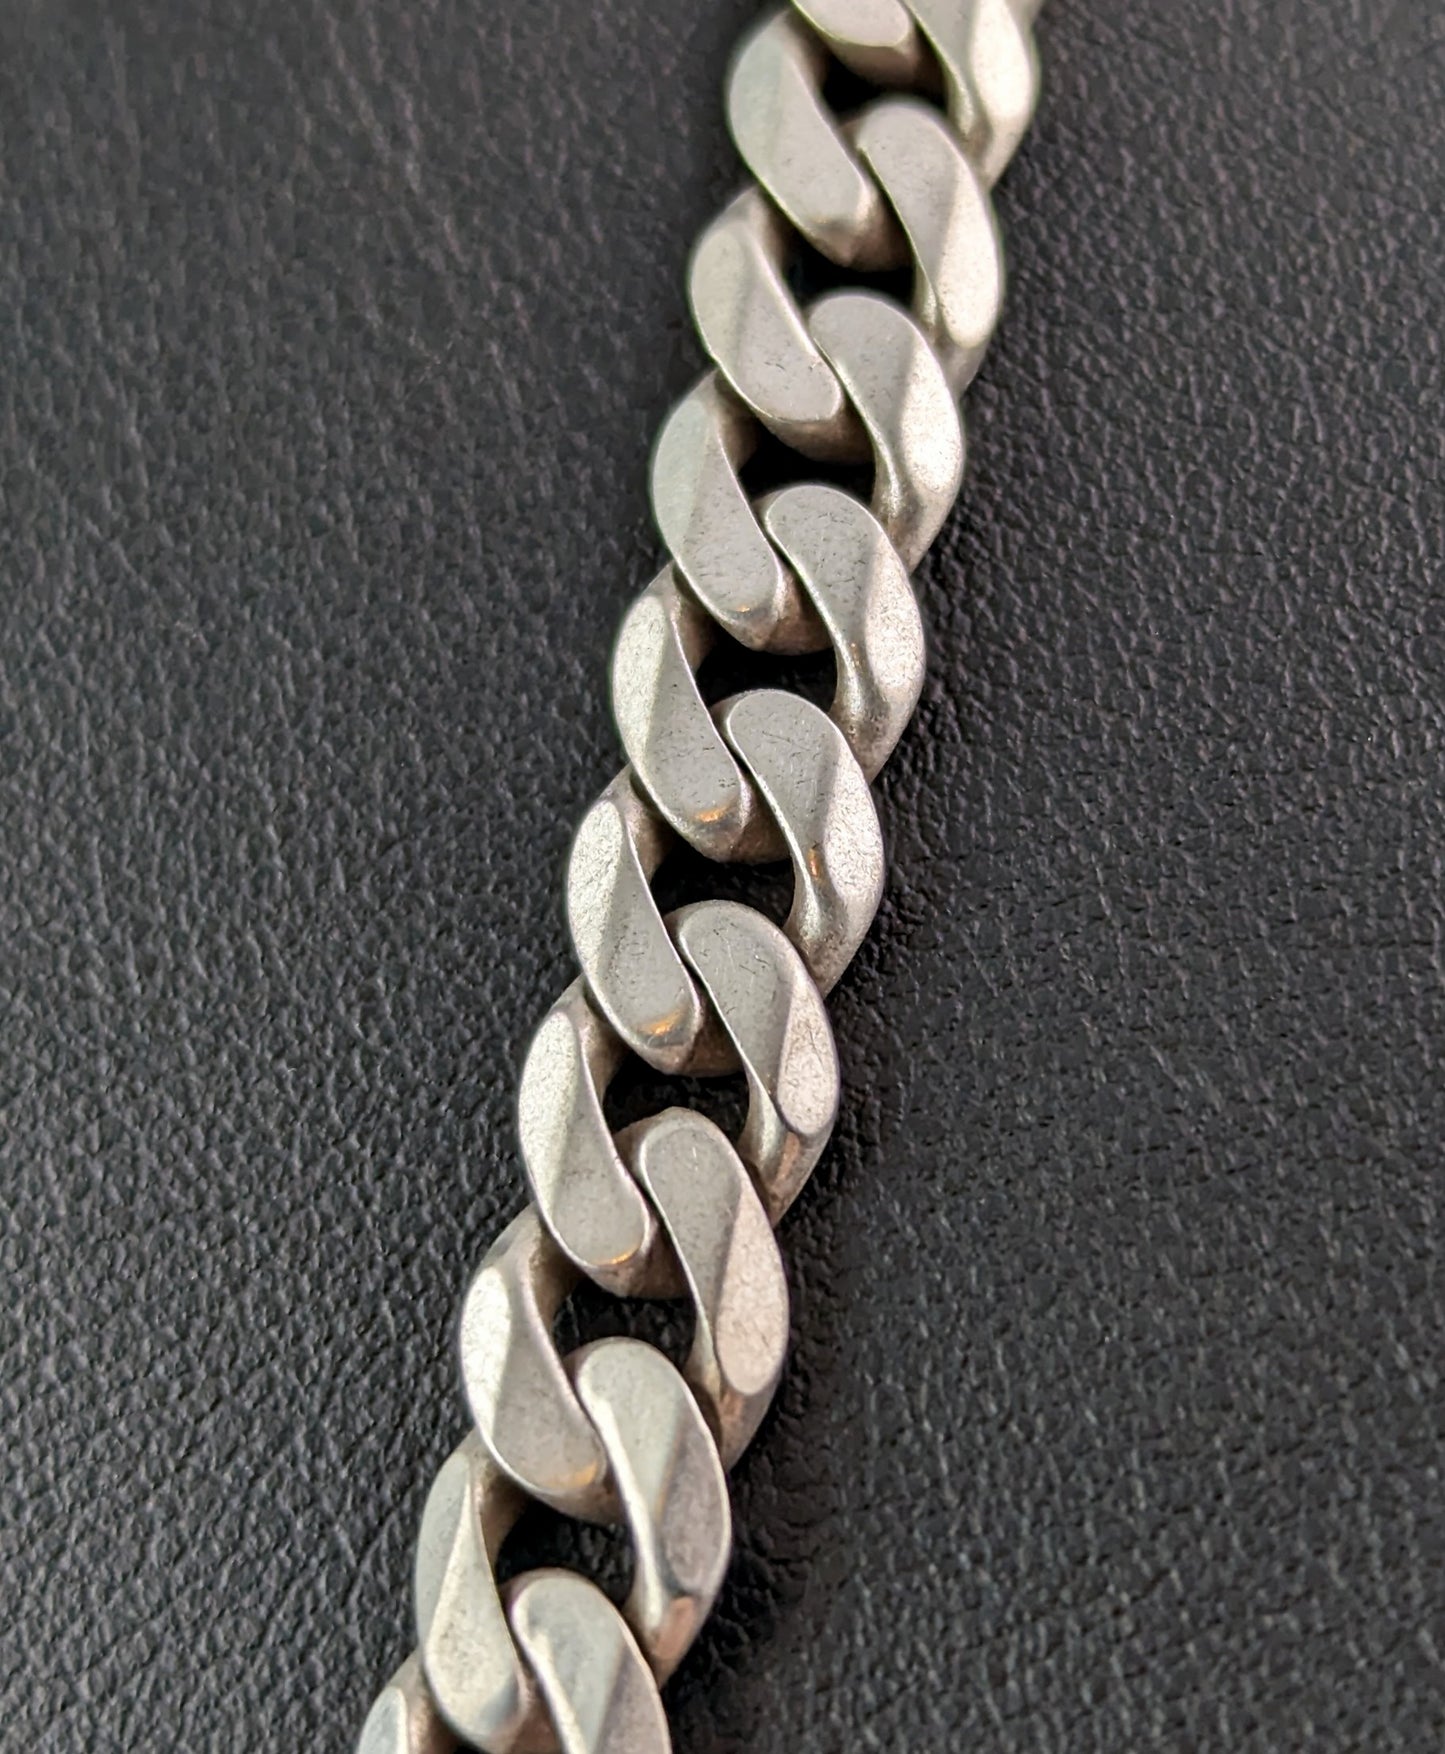 Vintage sterling silver flat curb link chain necklace